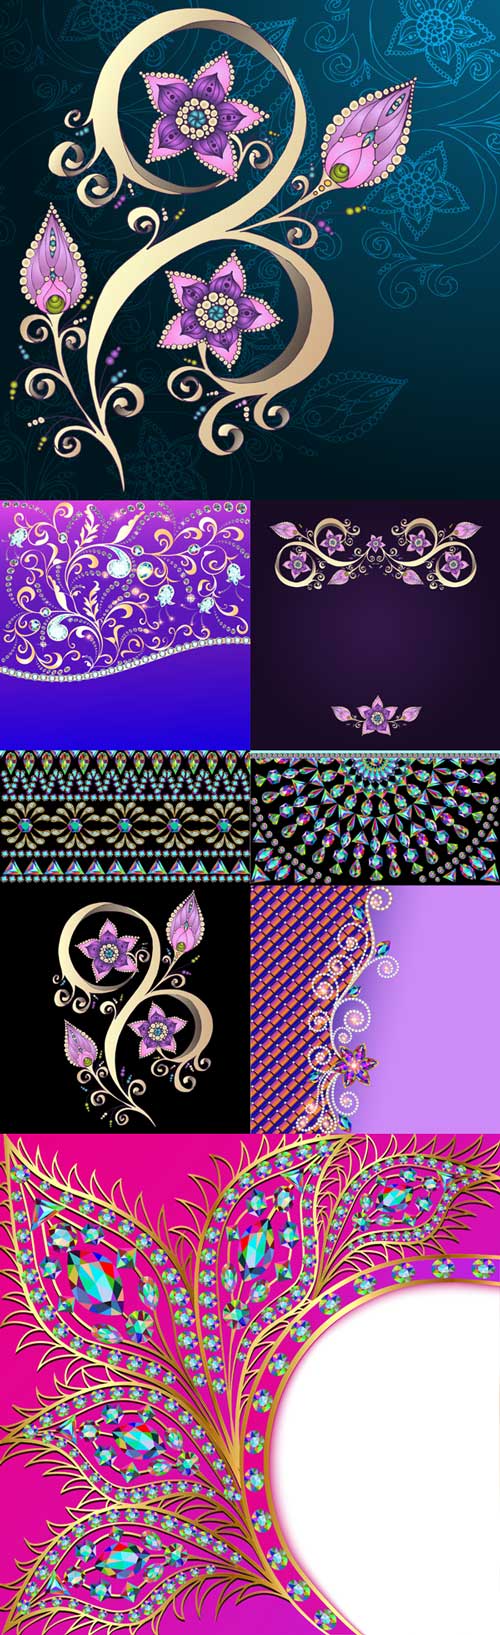 Vector background with floral ornaments and precious stones